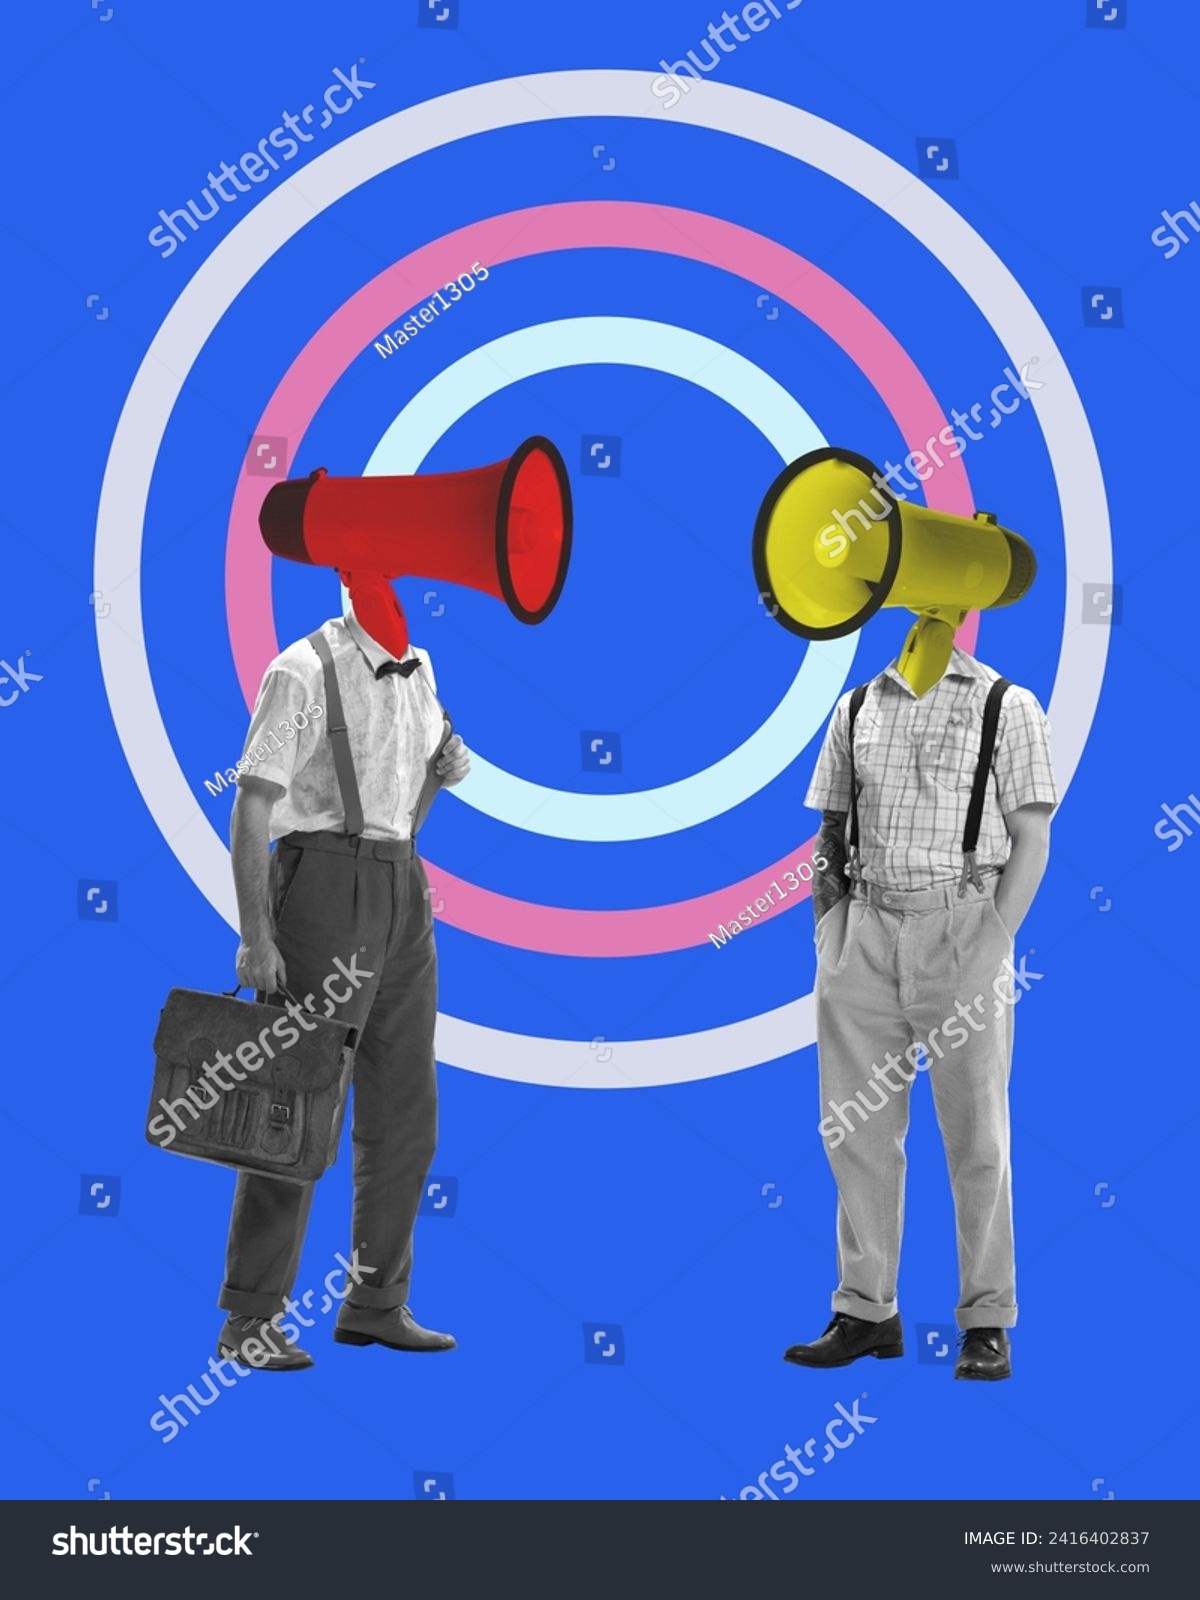 Poster for debate club focusing on power of speech and persuasion in public discourse. Contemporary art. Two individuals with megaphones for heads facing each other. Communication power #2416402837